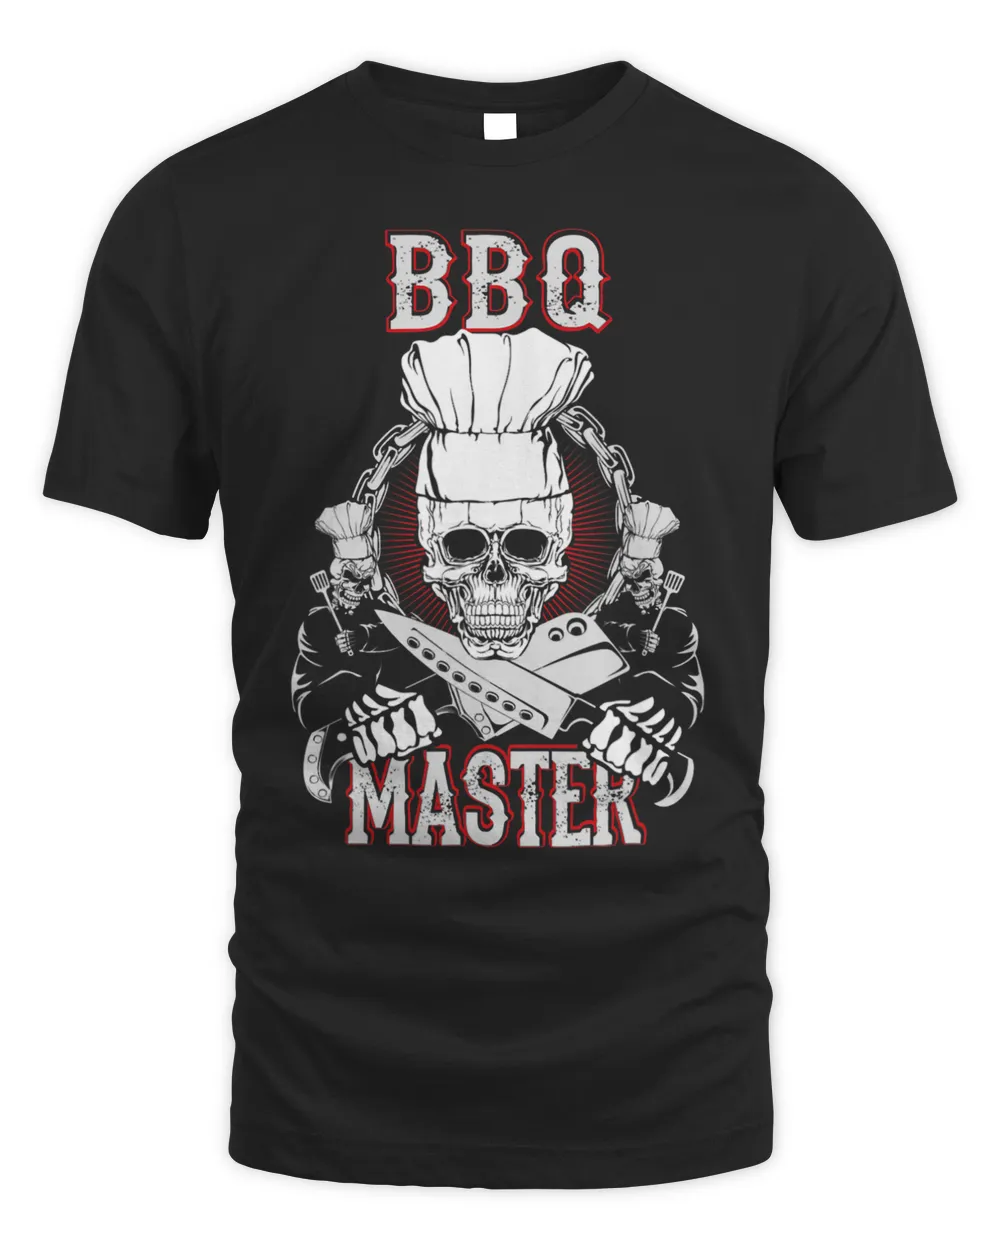 BBQ Master the shirt for the master at the grill